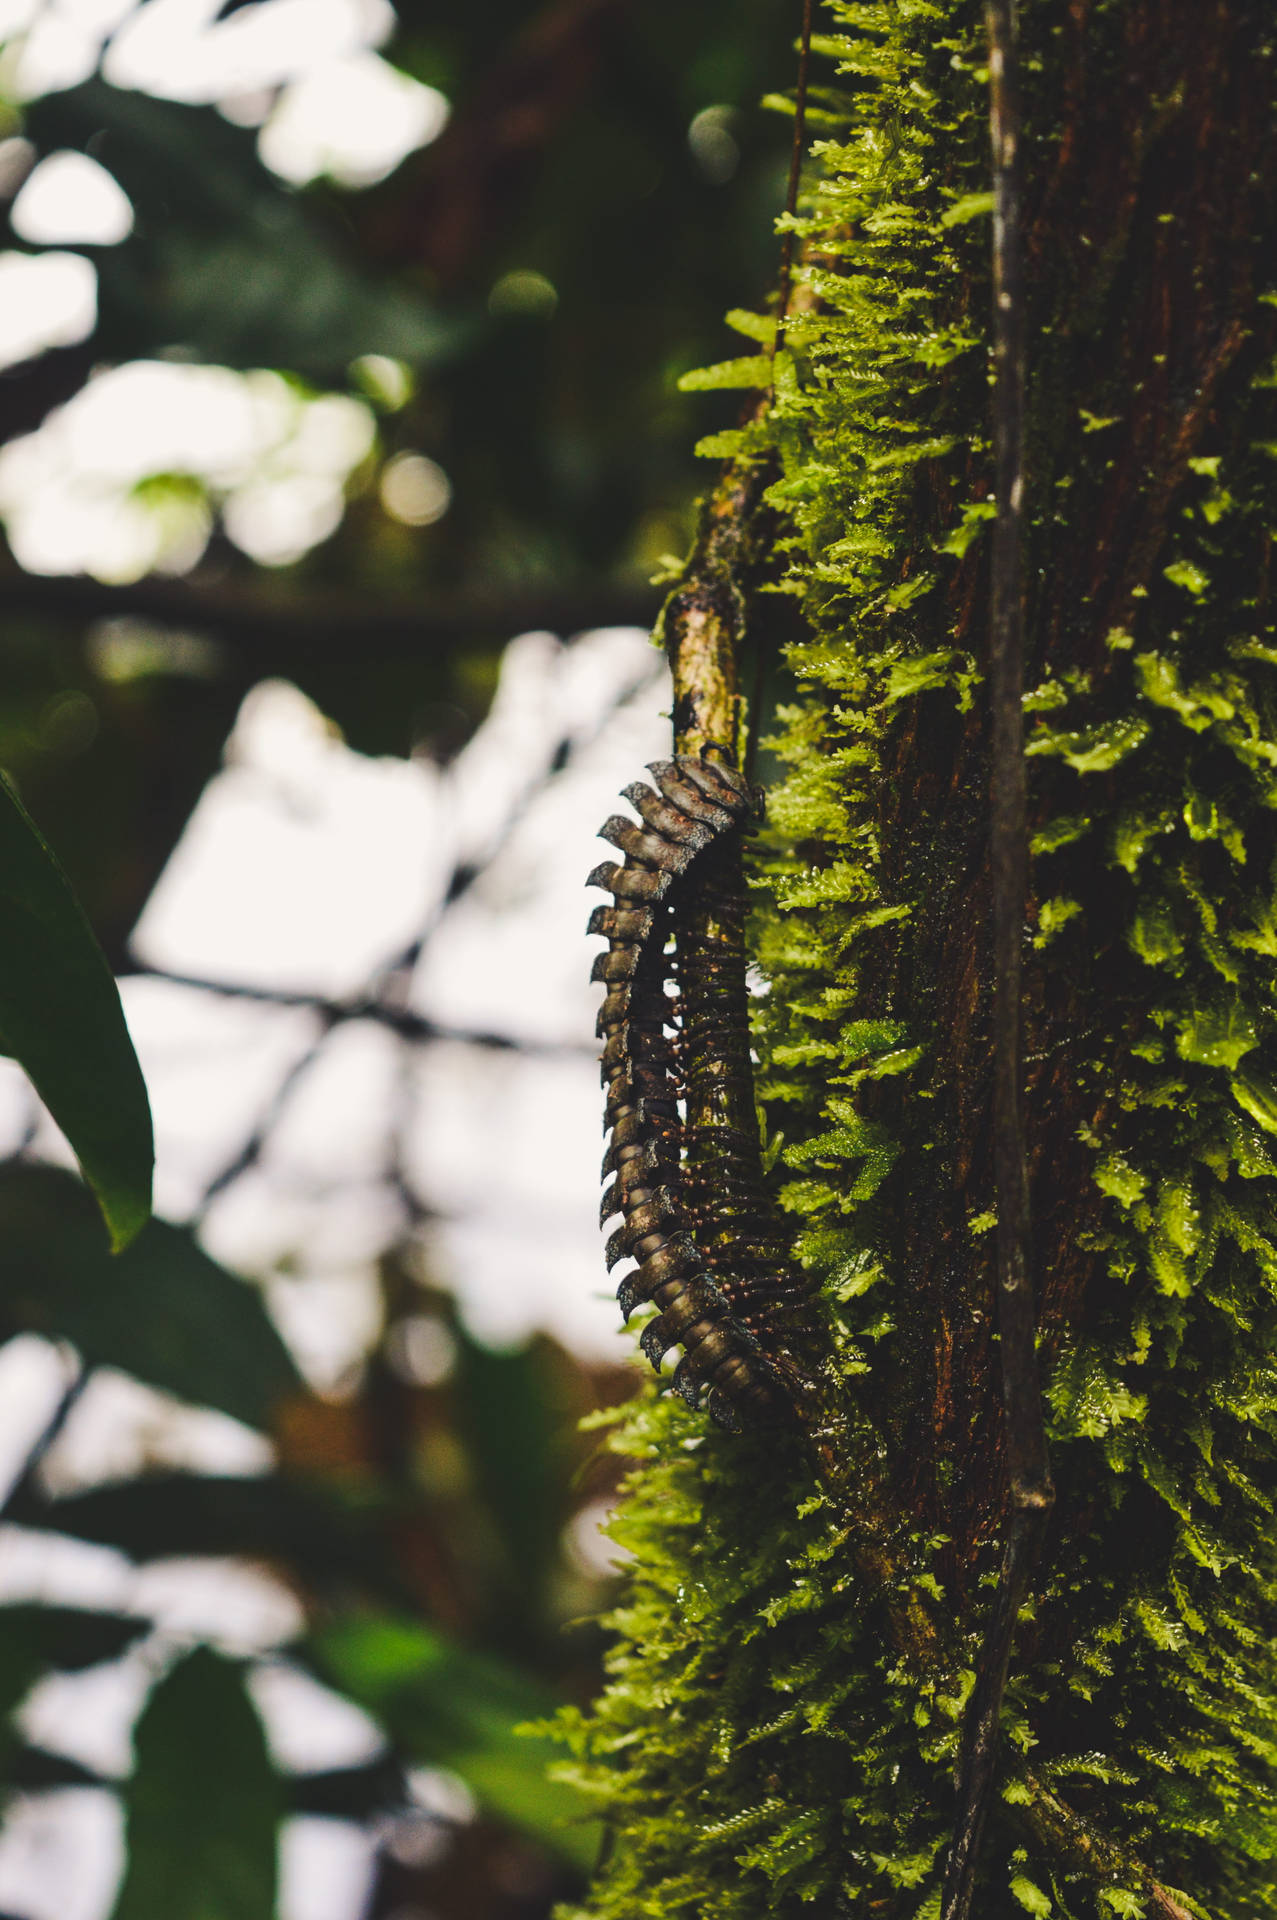 Centipede Crawling On Mossy Tree Trunk Wallpaper